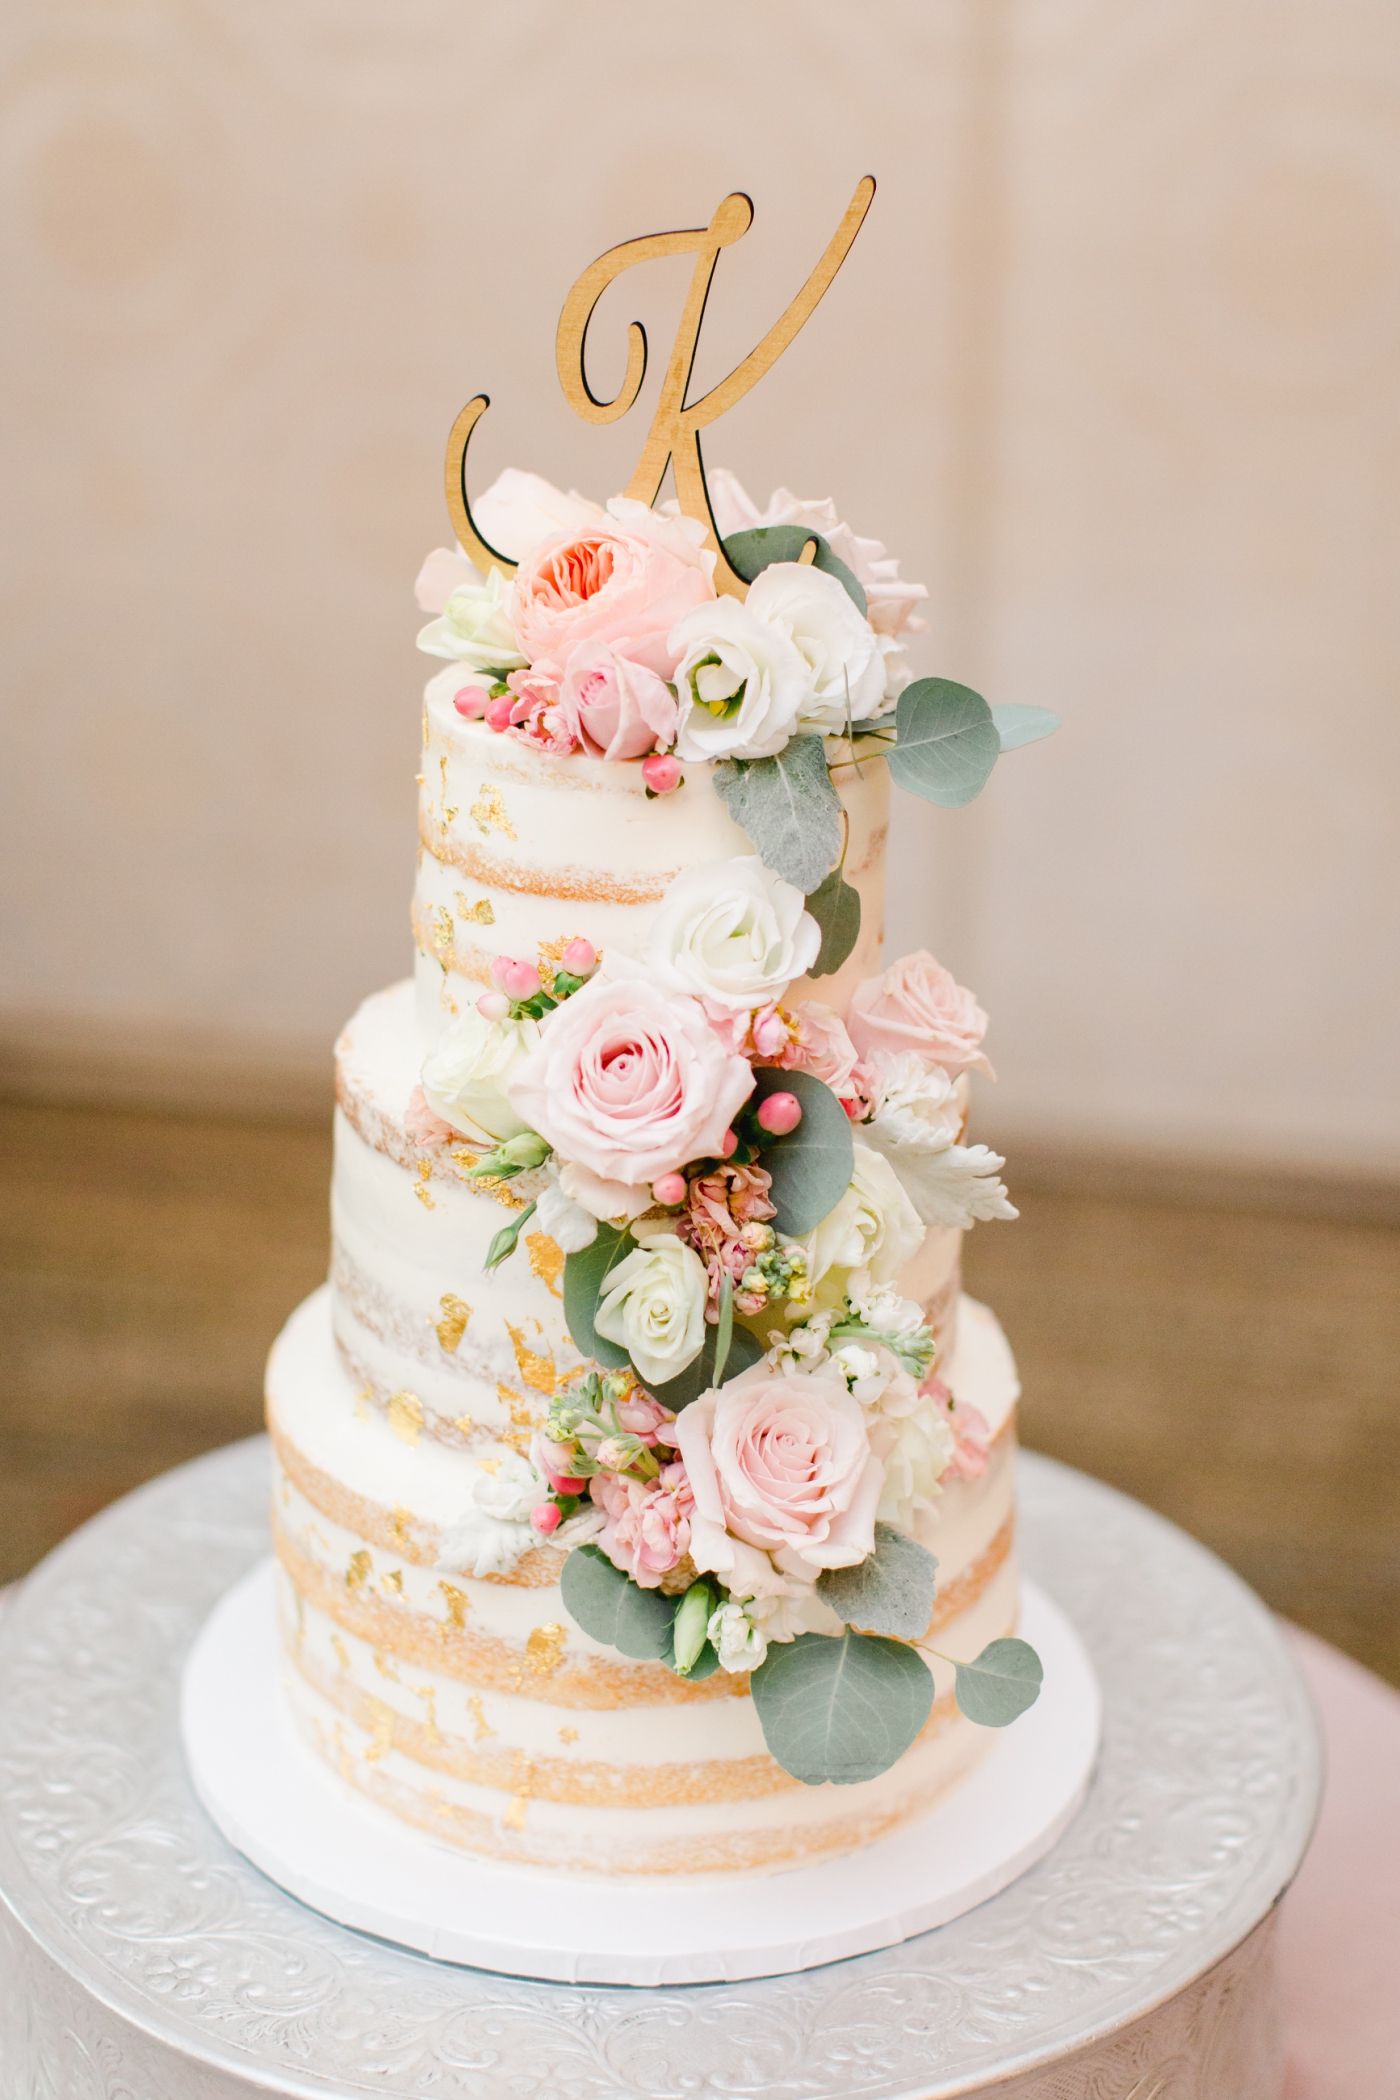 incorporate flowers into your wedding cake